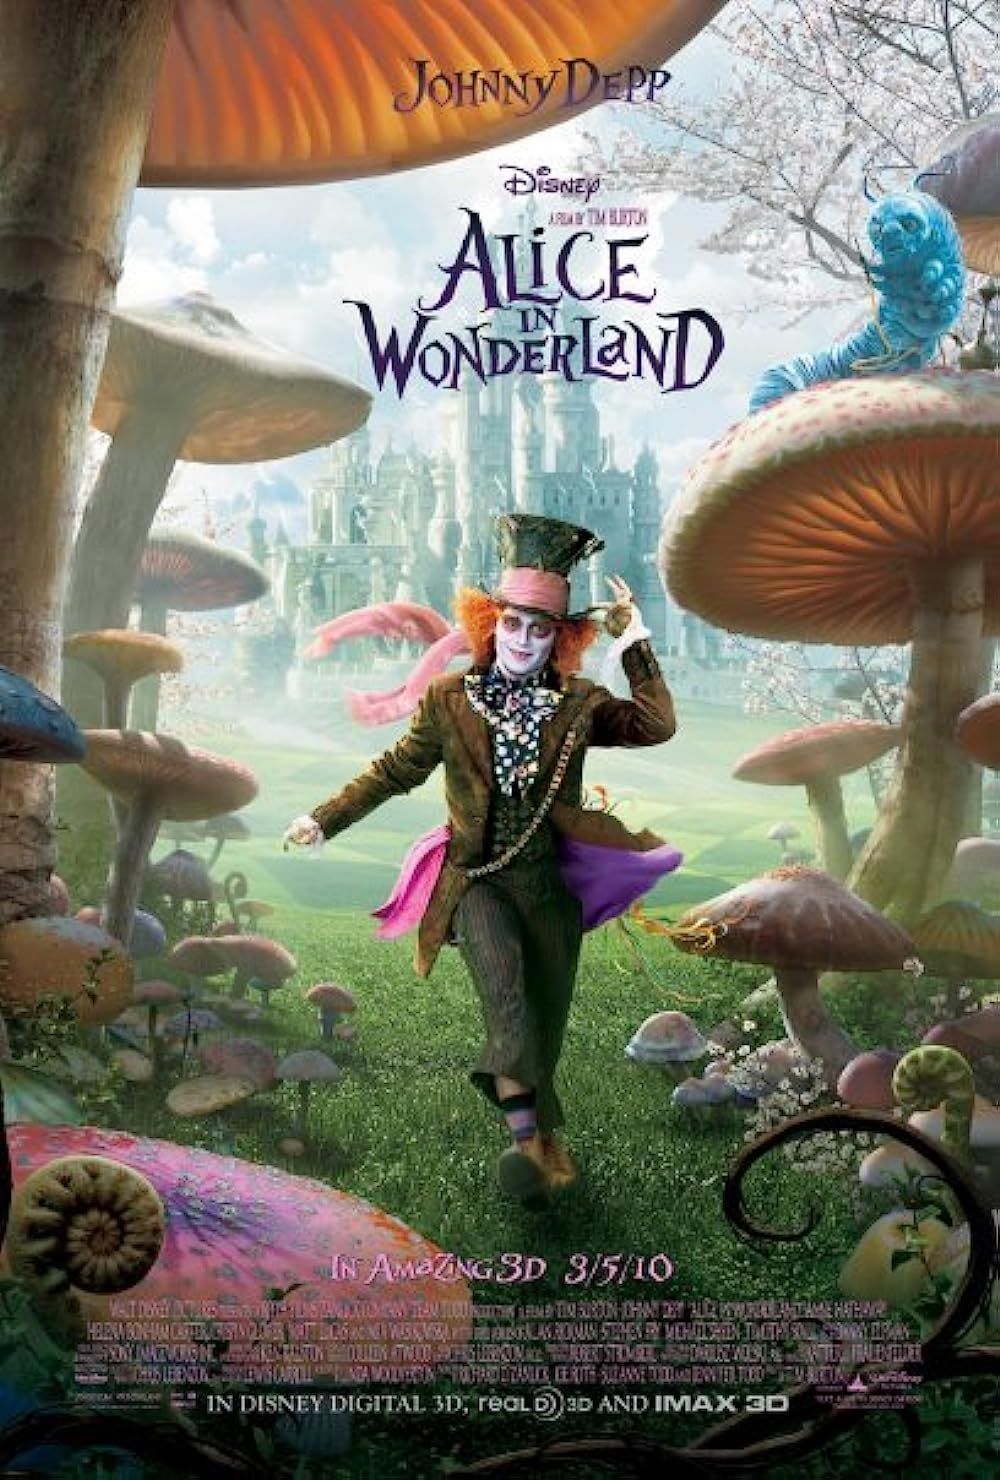 The Mad Hatter strolling through a mushroom forest in the live-action Alice In Wonderland